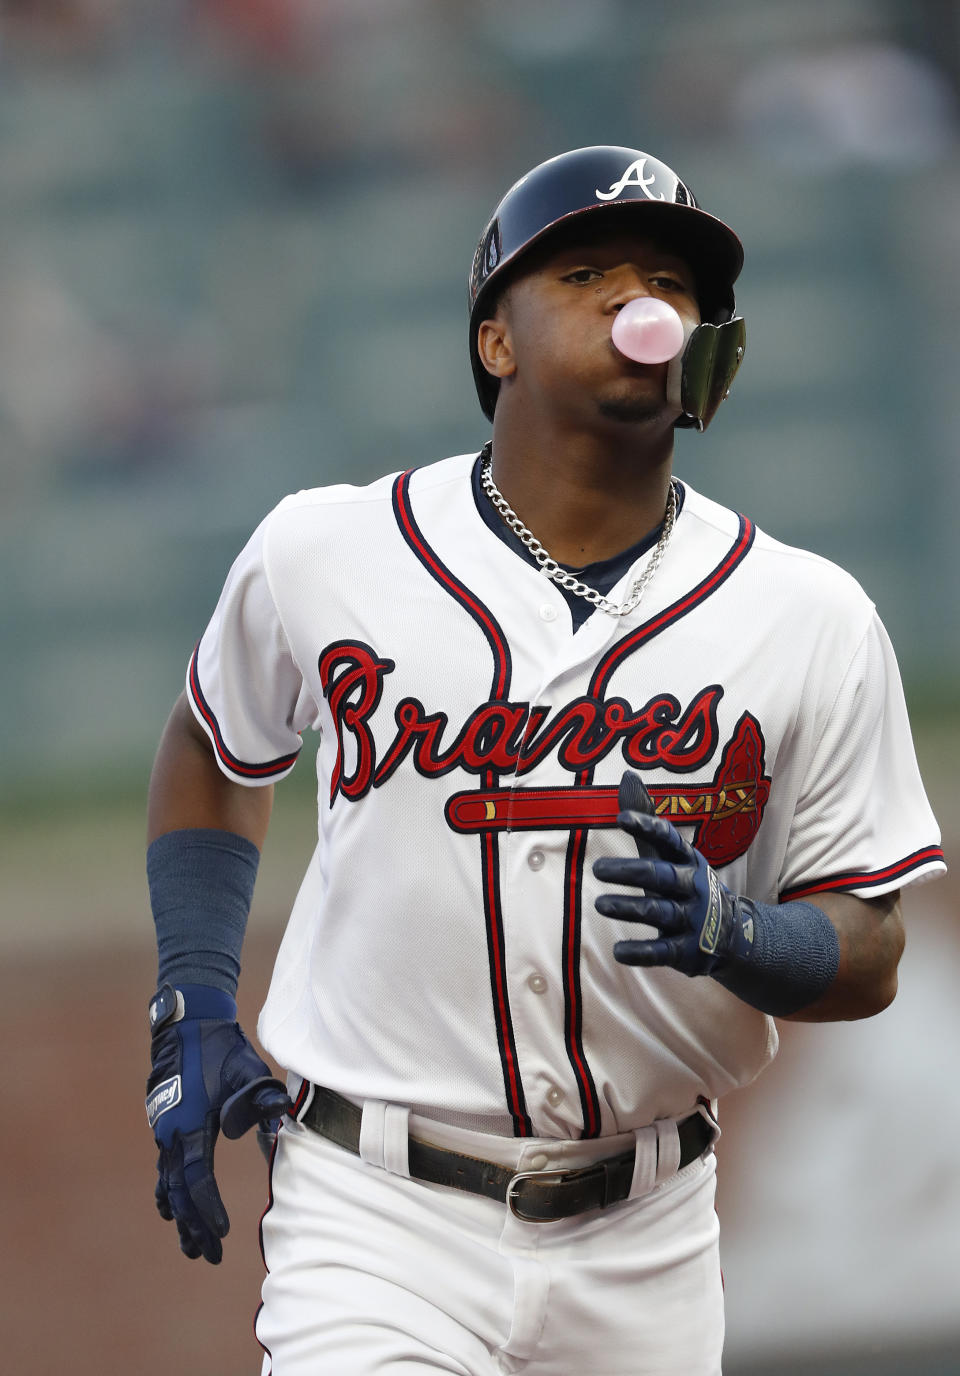 Atlanta Braves left fielder Ronald Acuna Jr. (13) blows a bubble as he rounds the bases after hitting a home run in the first inning of the second baseball game of a doubleheader against the Miami Marlins Monday, Aug. 13, 2018 in Atlanta. (AP Photo/John Bazemore)